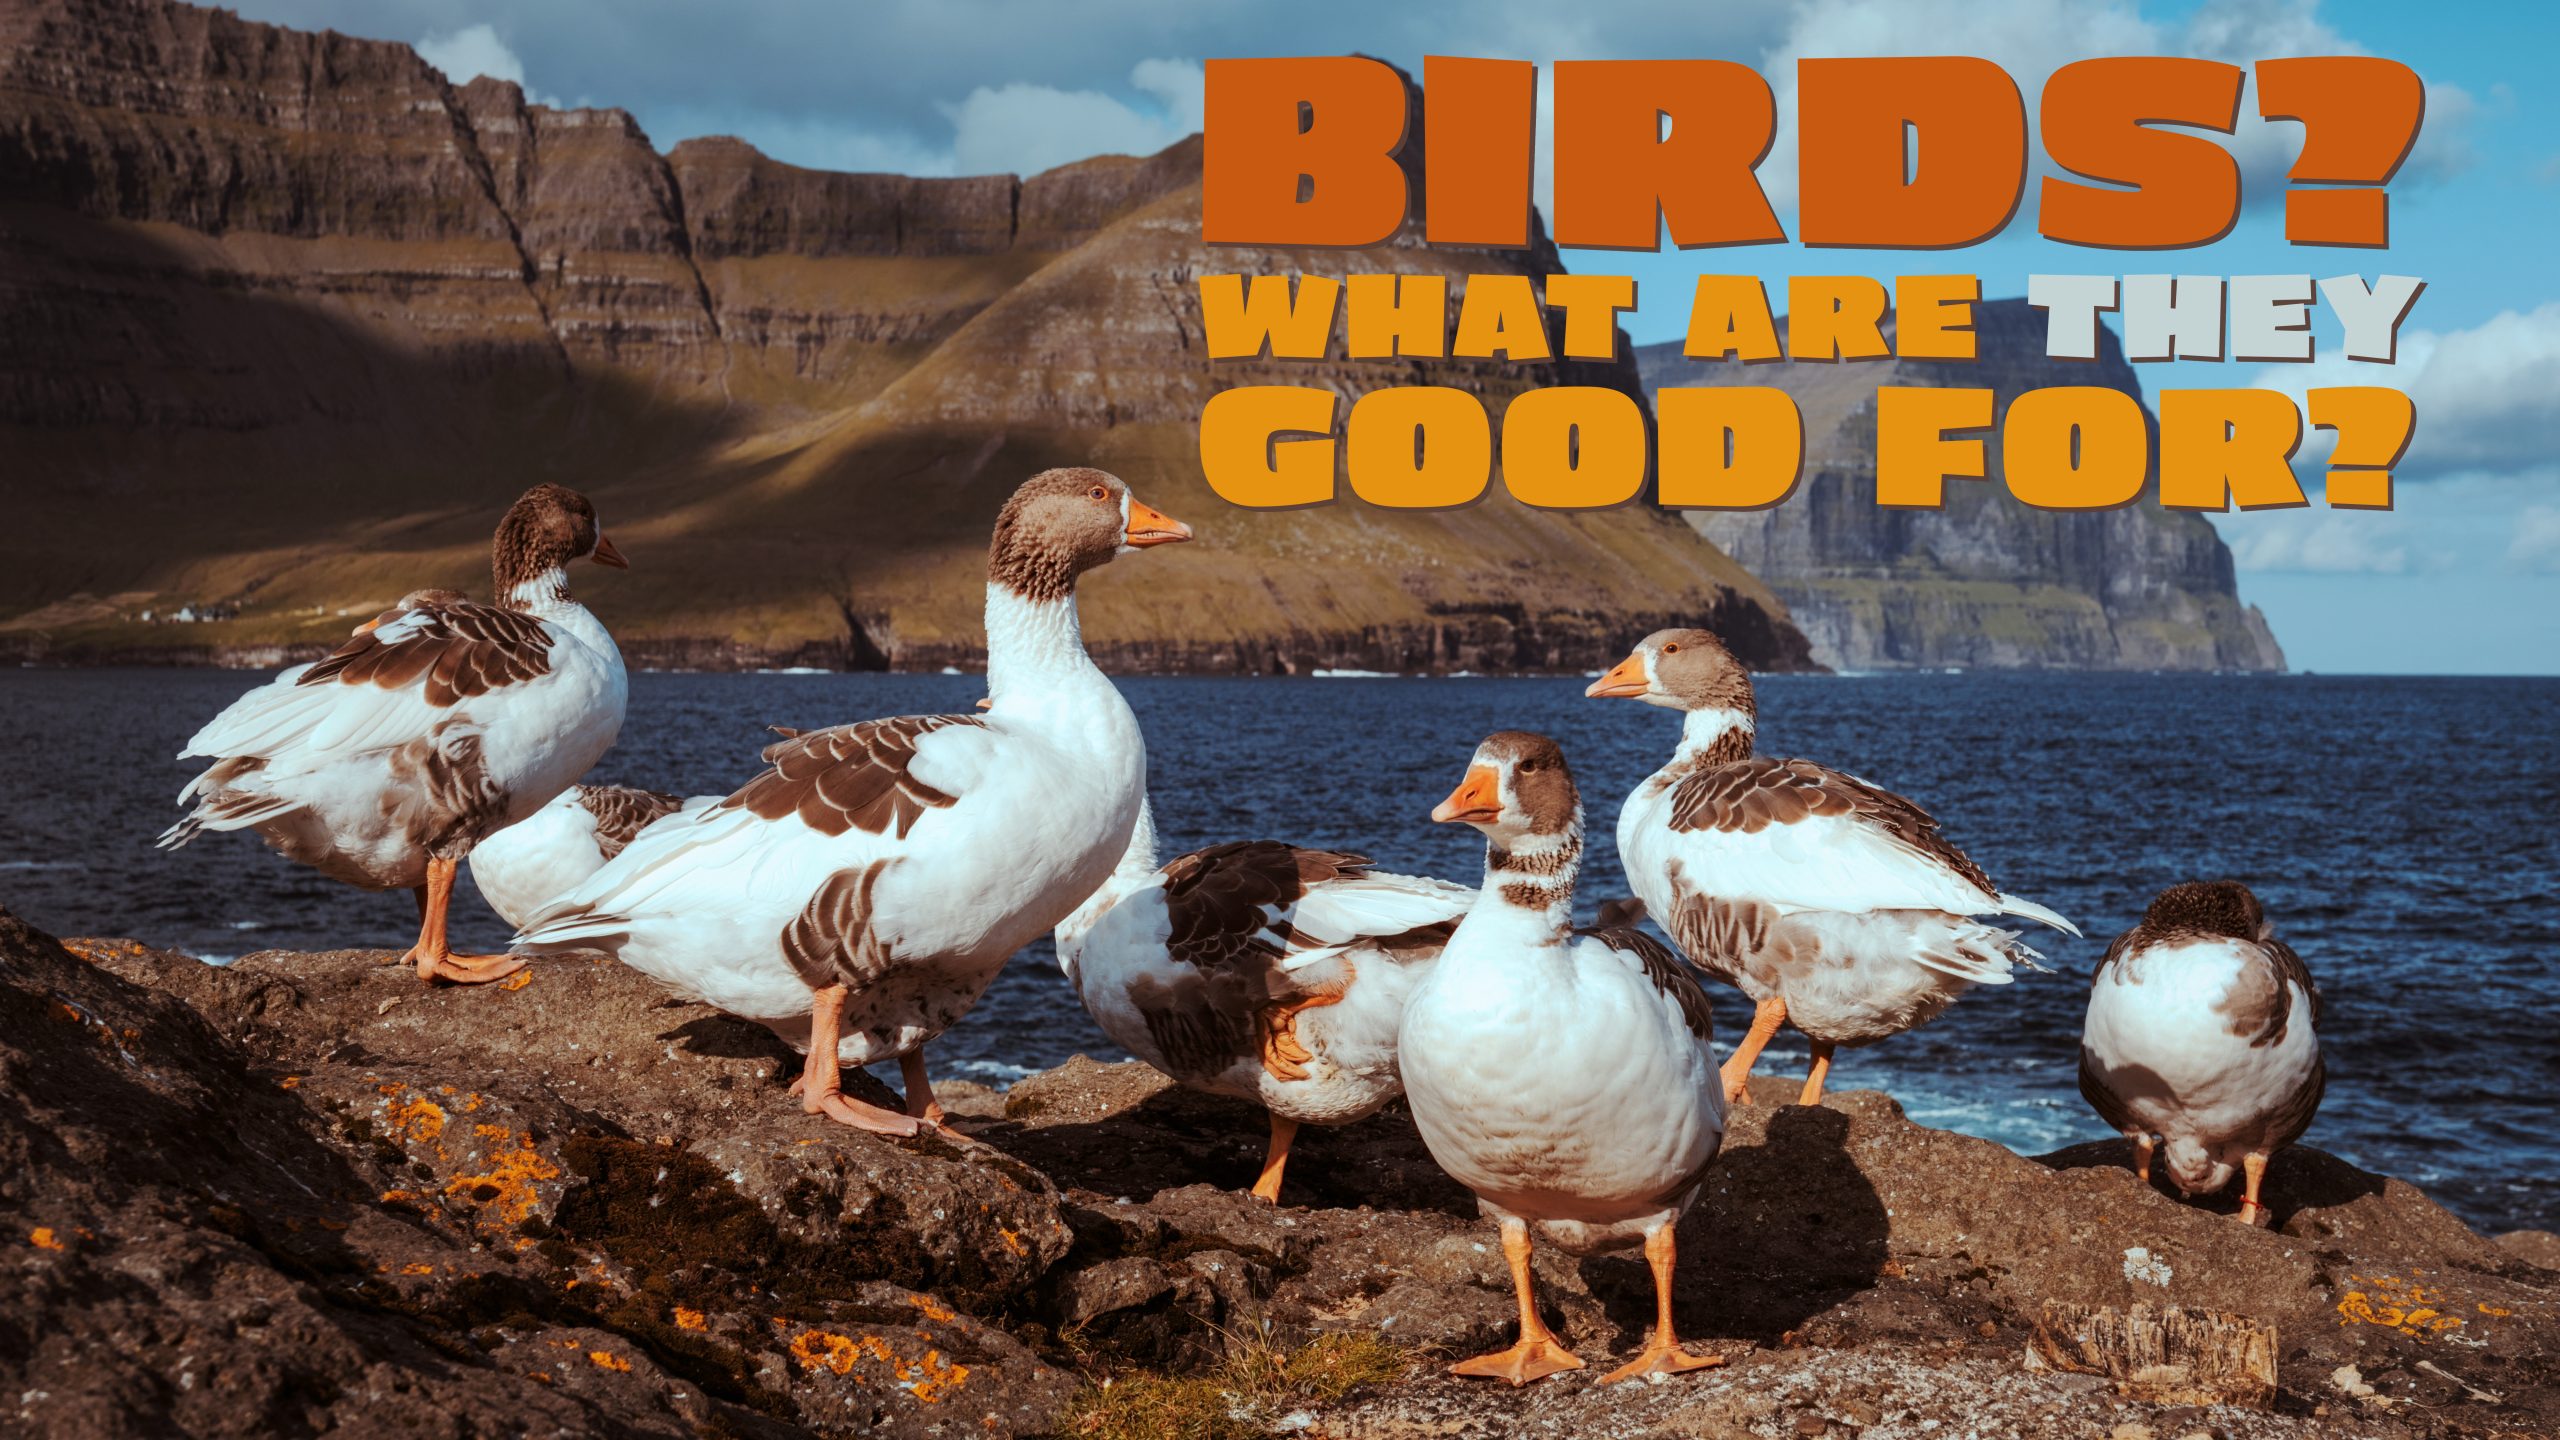 A poster for the movie 'Birds? What Are They Good For?' featuring white birds standing on a rock by a lake.